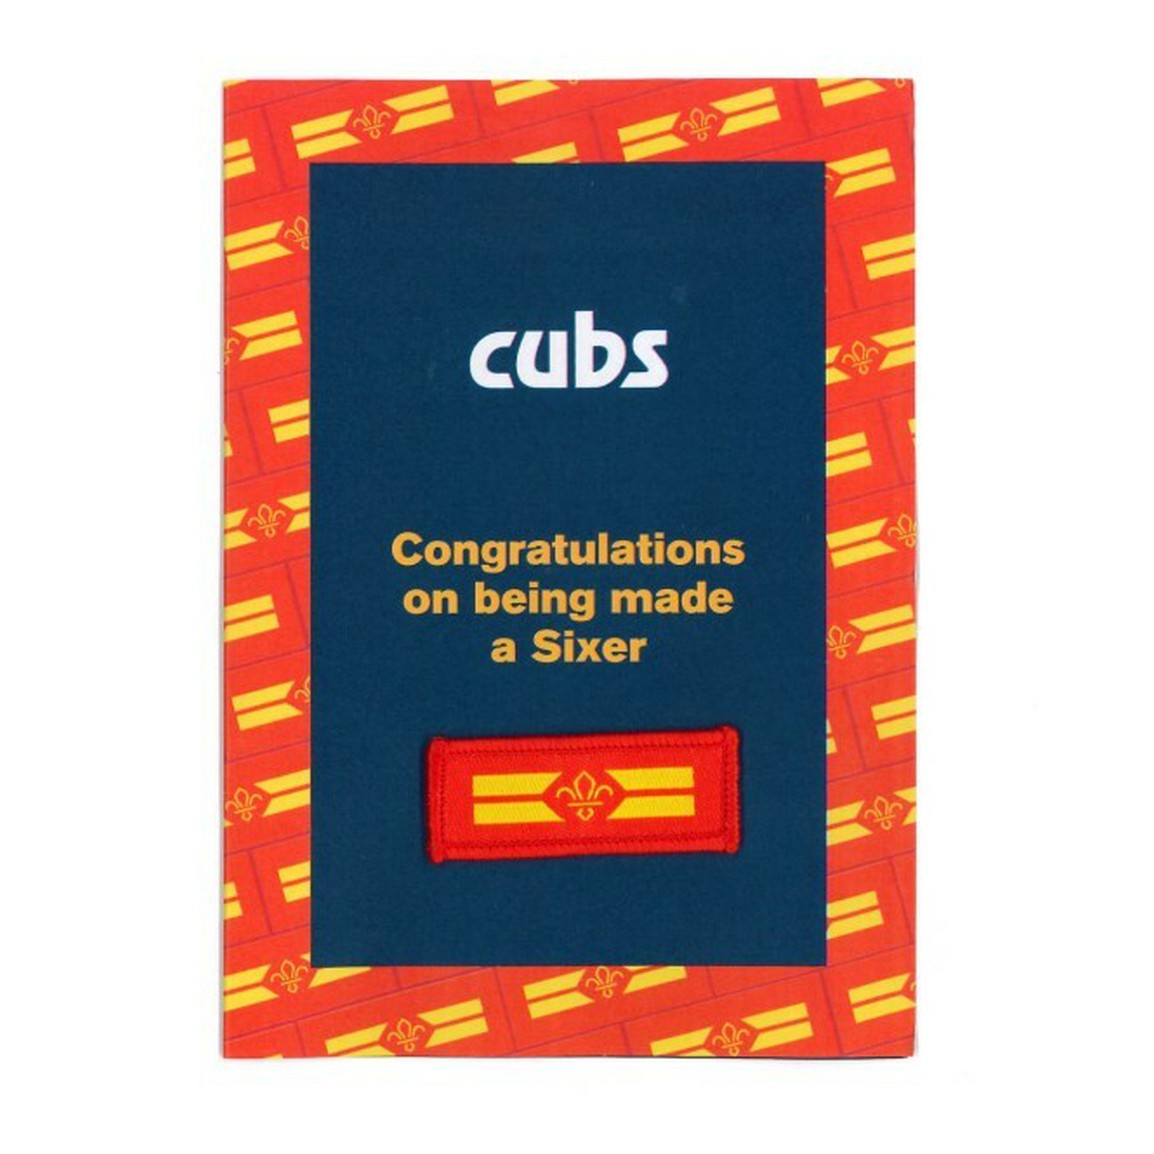 Cub Scout Sixer Badge and Top Tips Leaflet